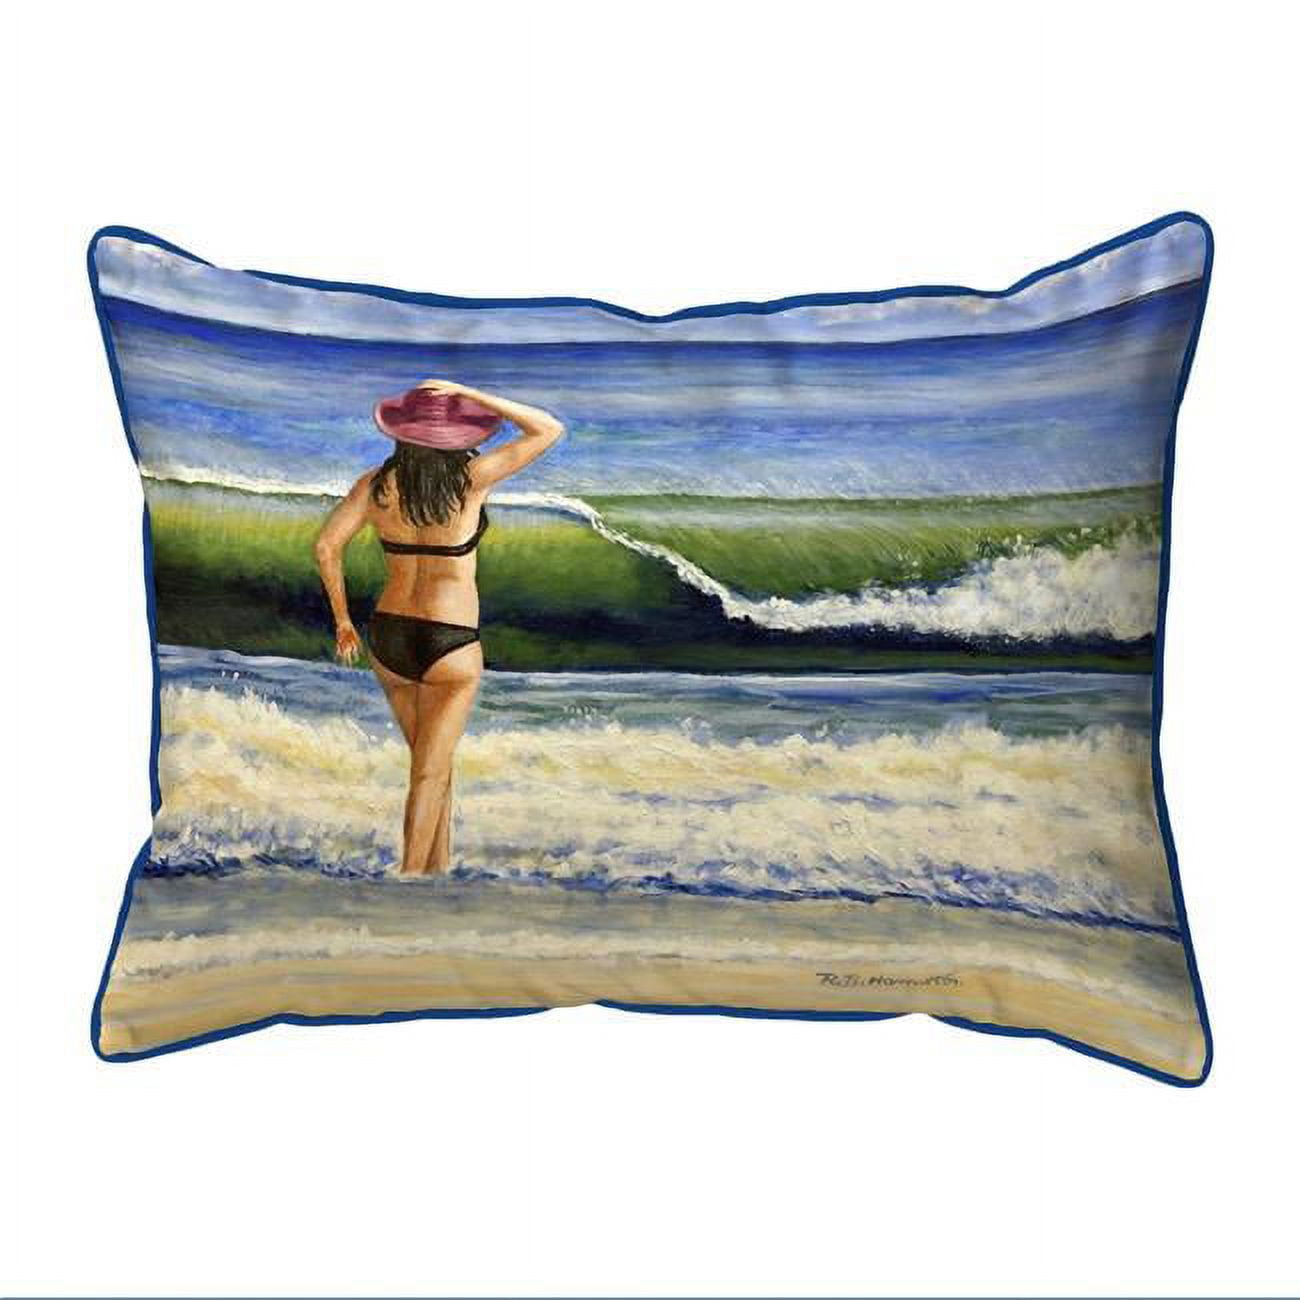 Planon 20 x 24 in. Into the Breach Extra Zippered Pillow - Large